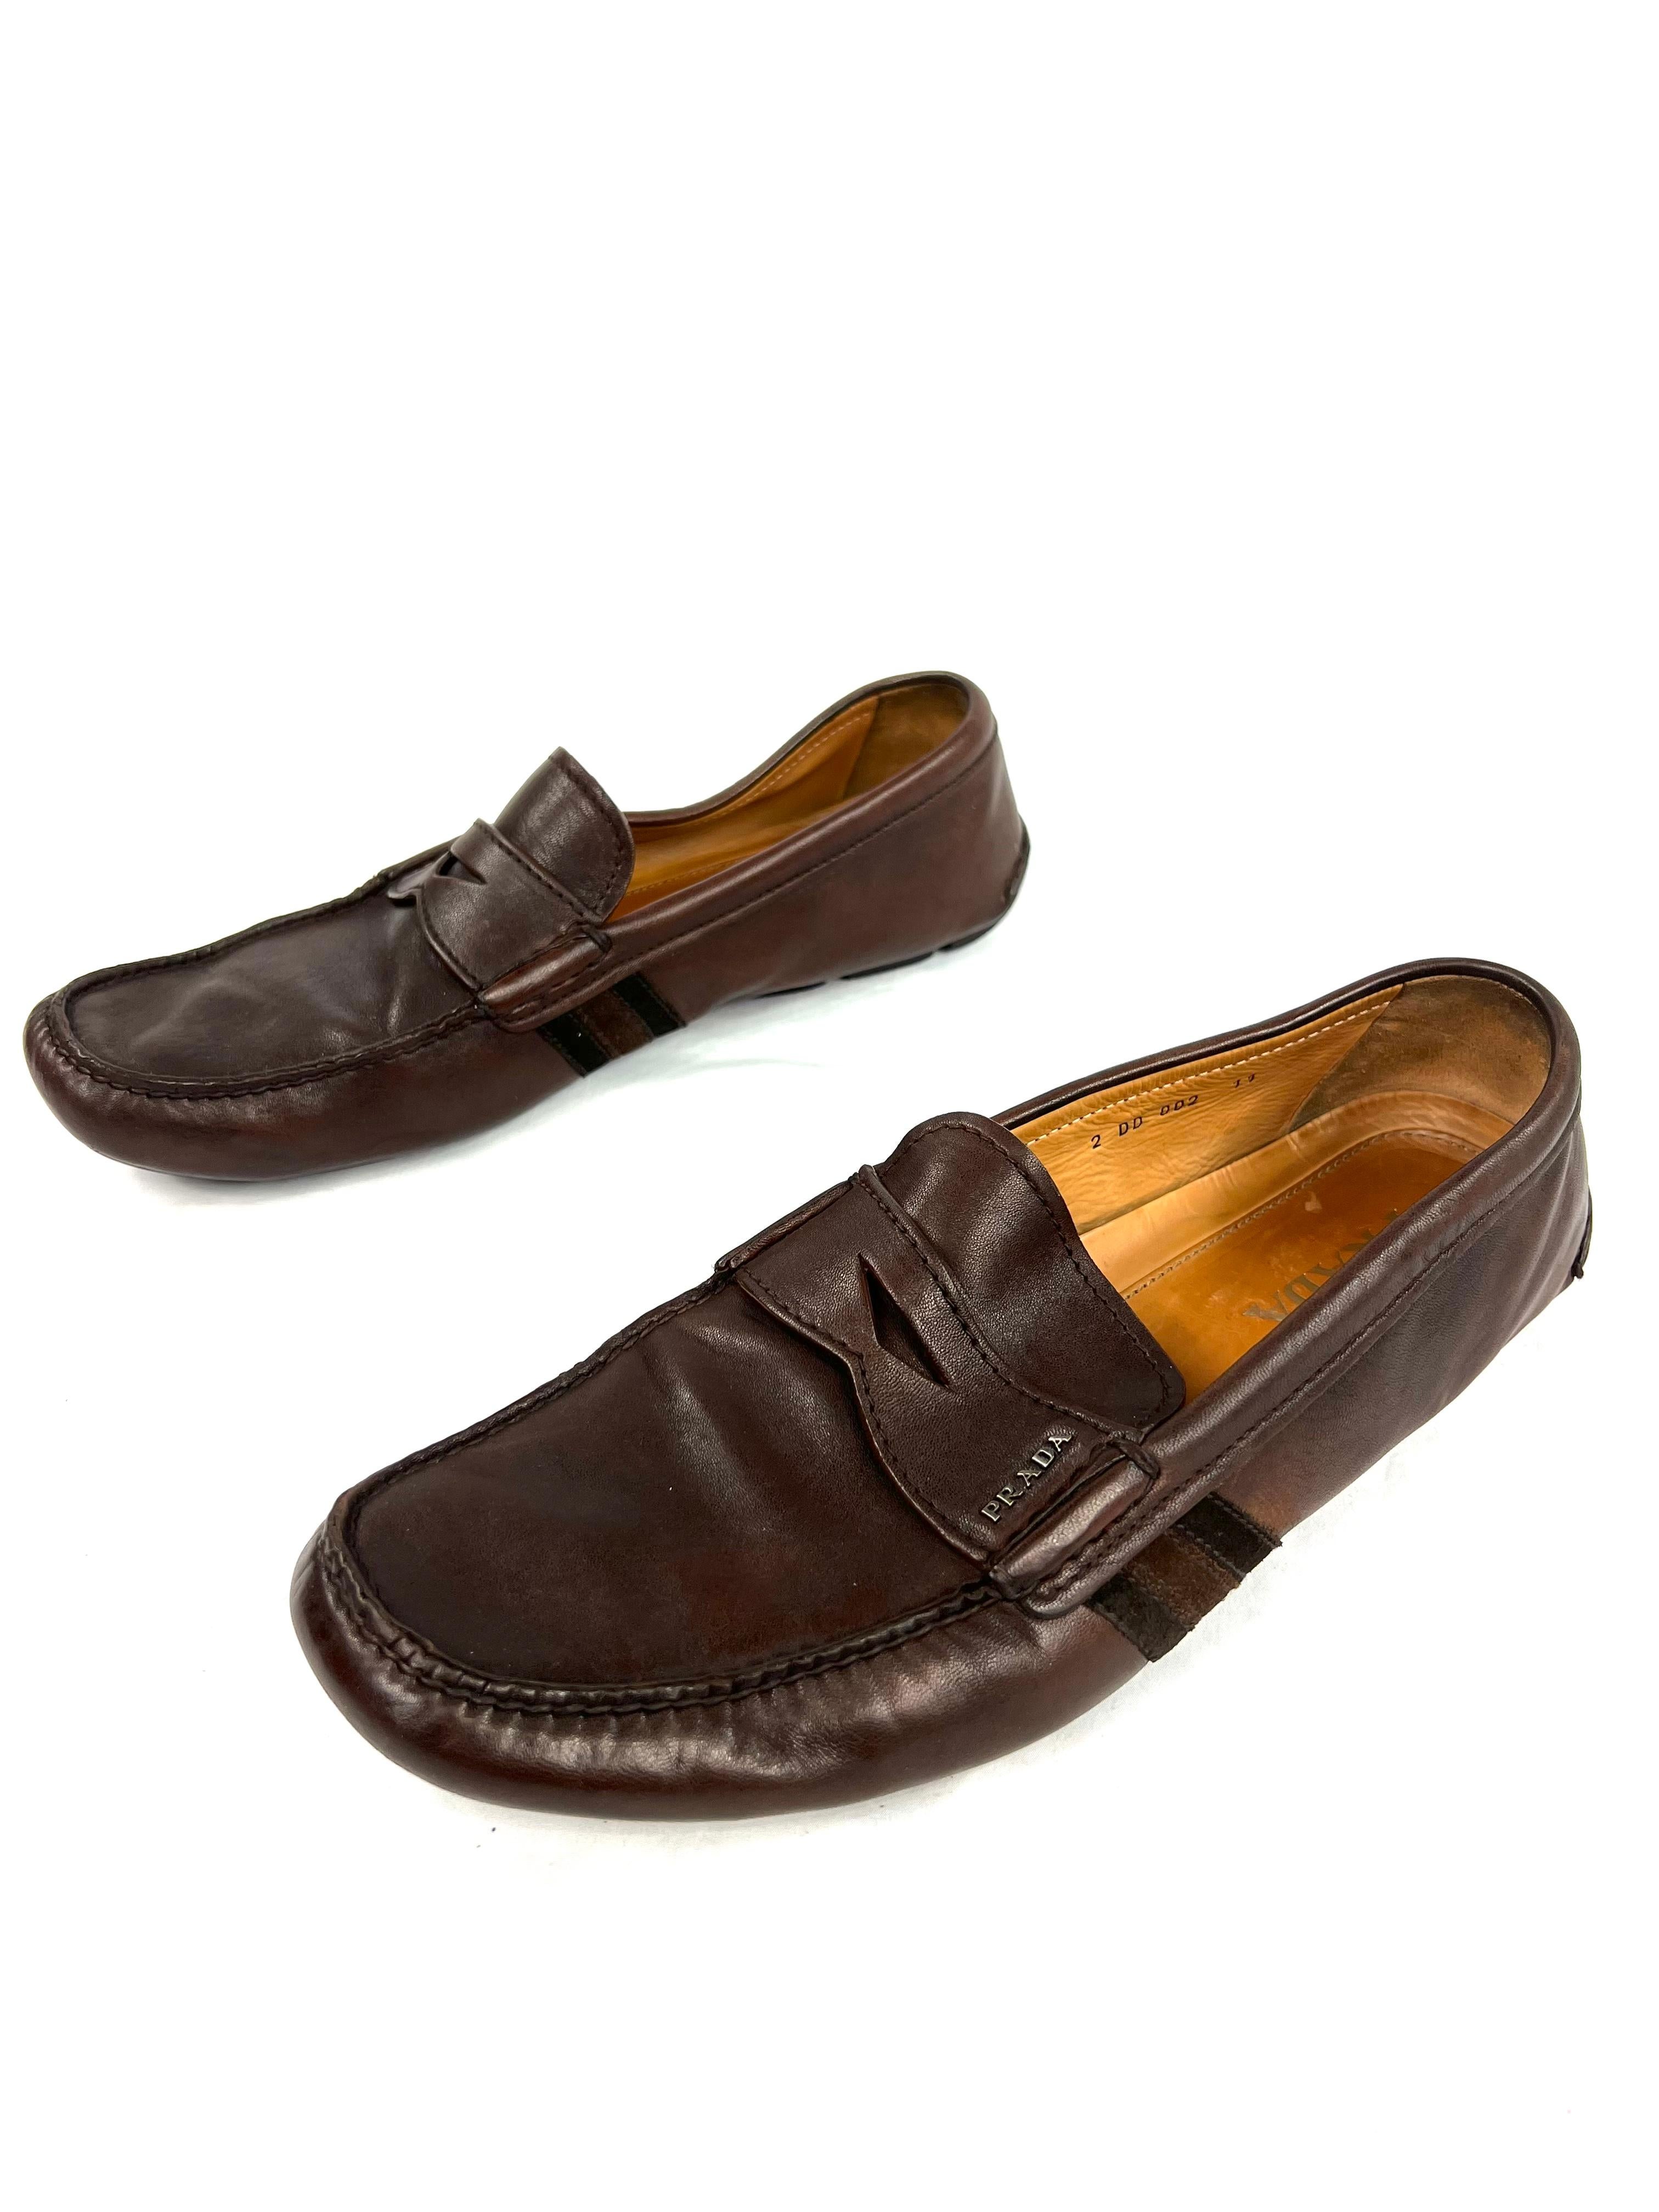 Black Prada Brown Leather Moccasins Flat Shoes, Size 11 For Sale